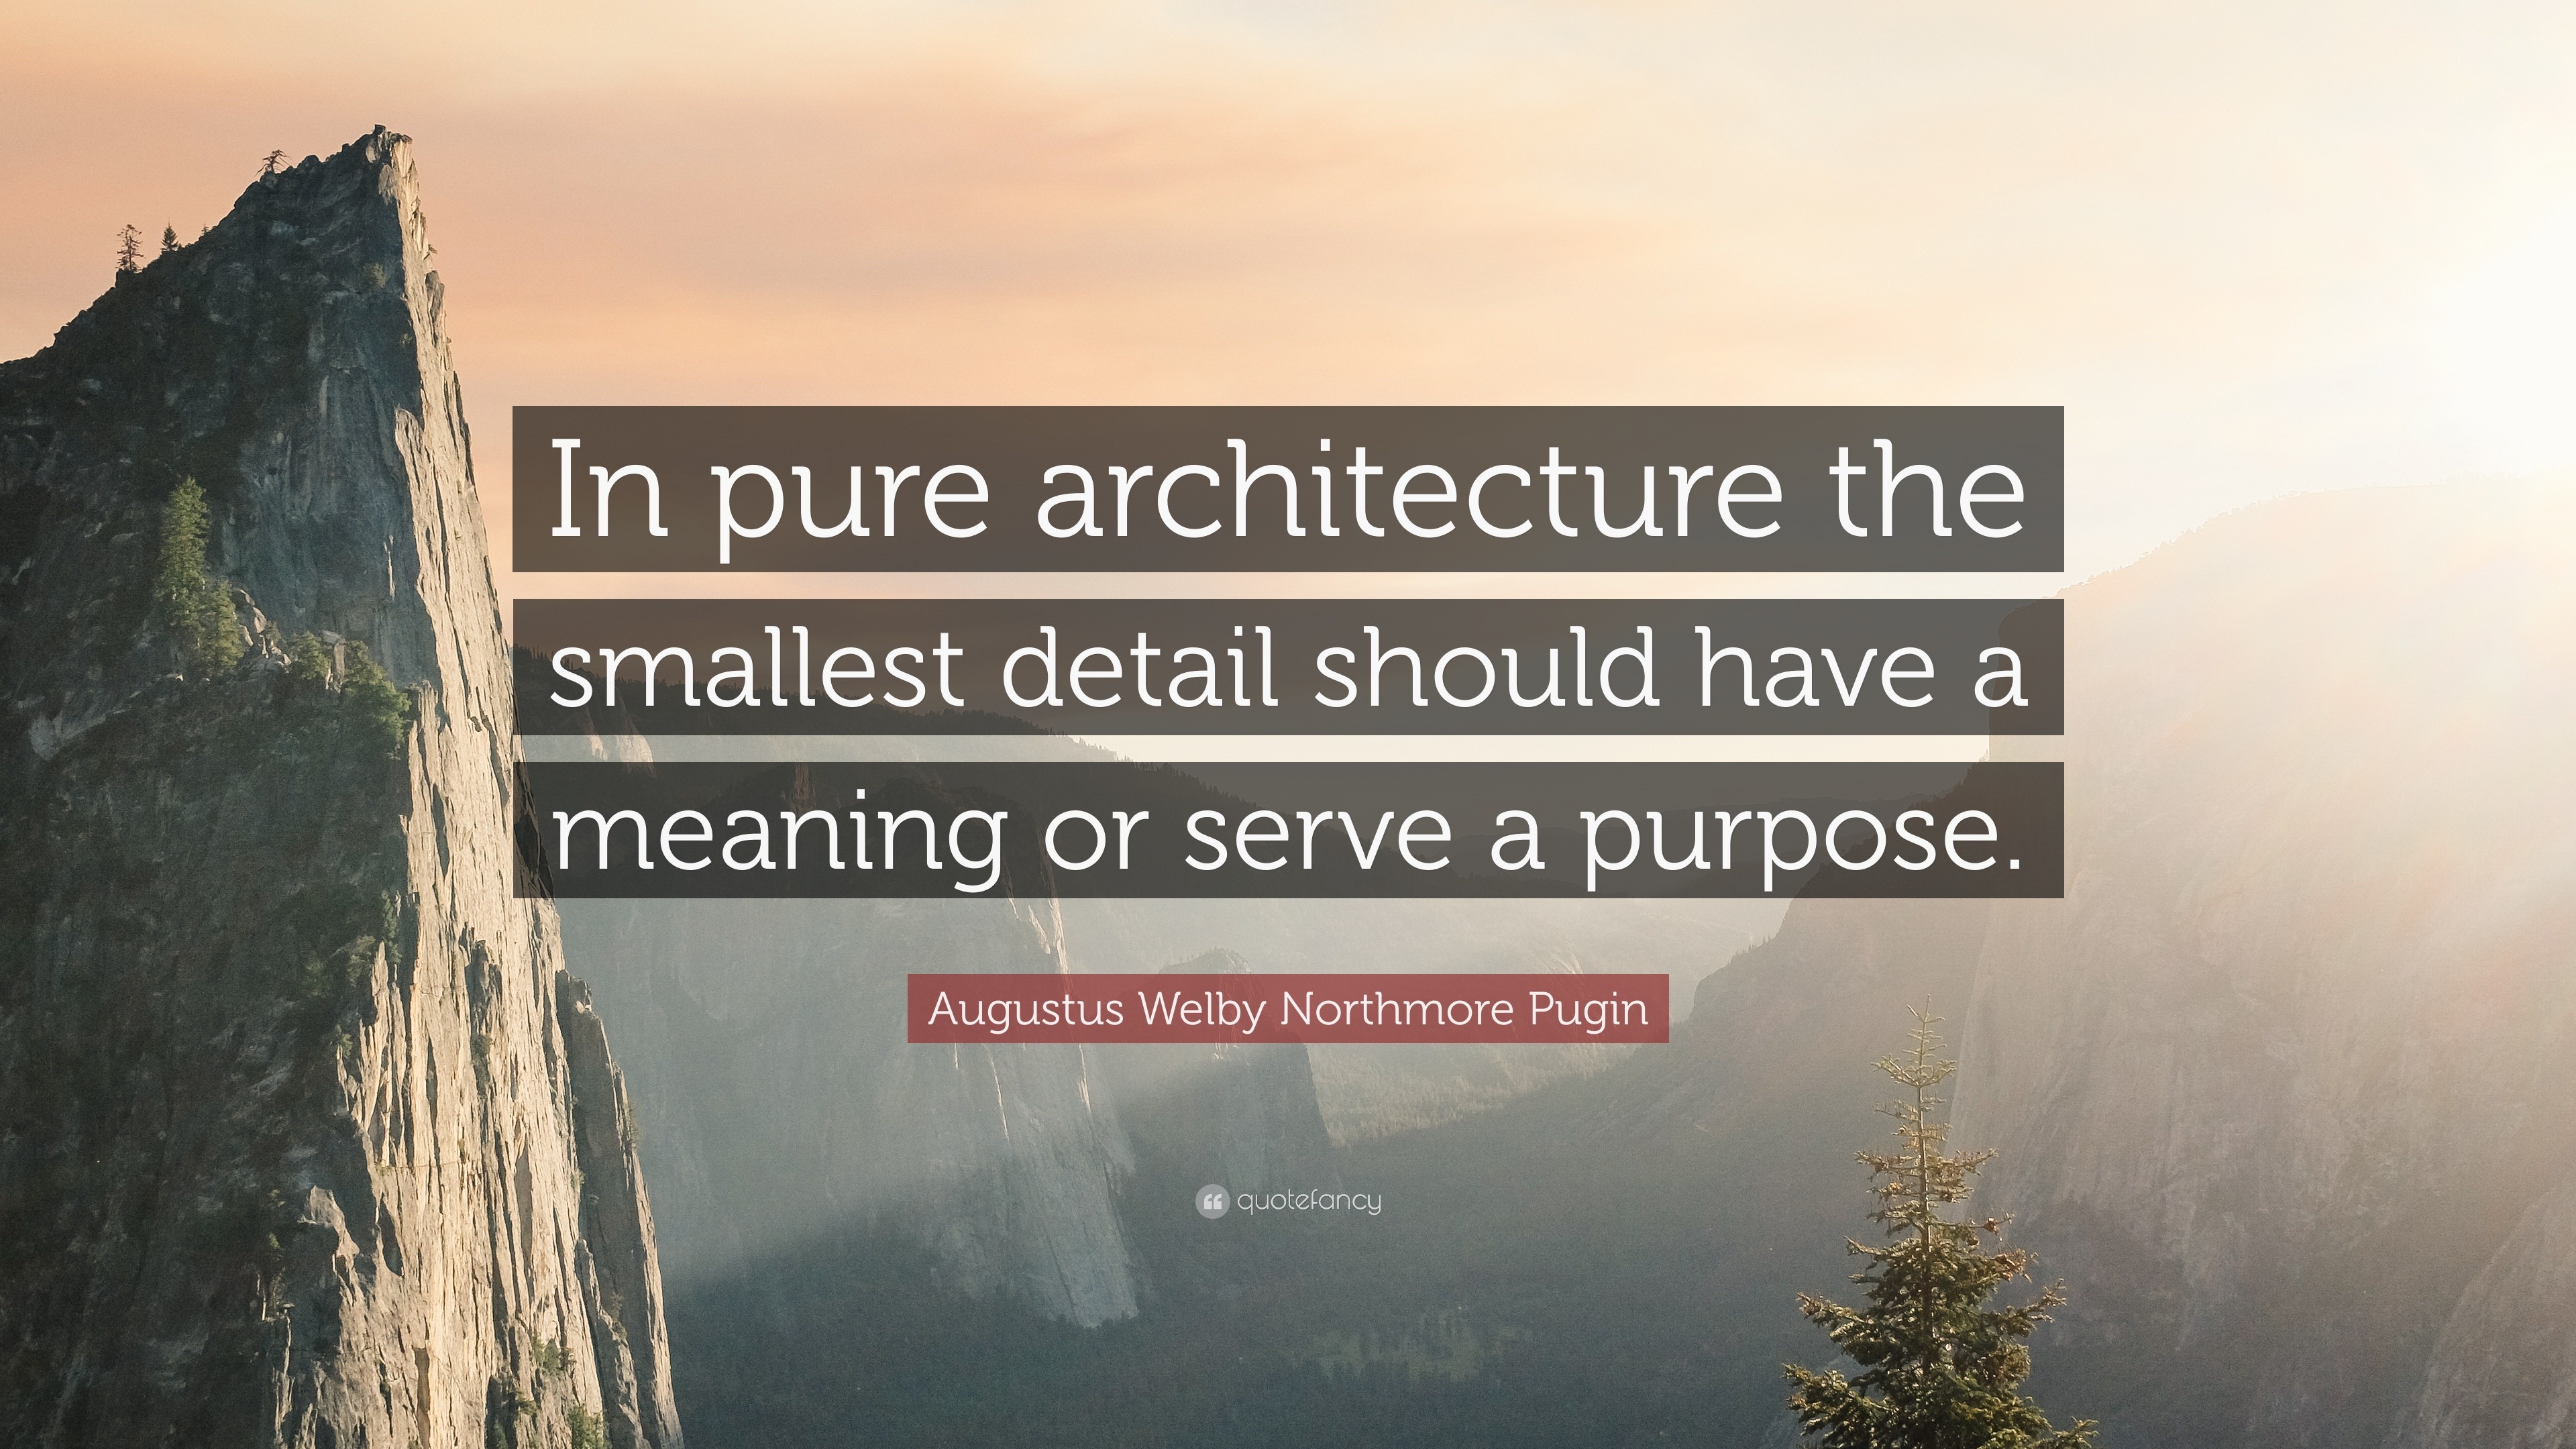 Augustus Welby Northmore Pugin Quote: “In pure architecture the ...